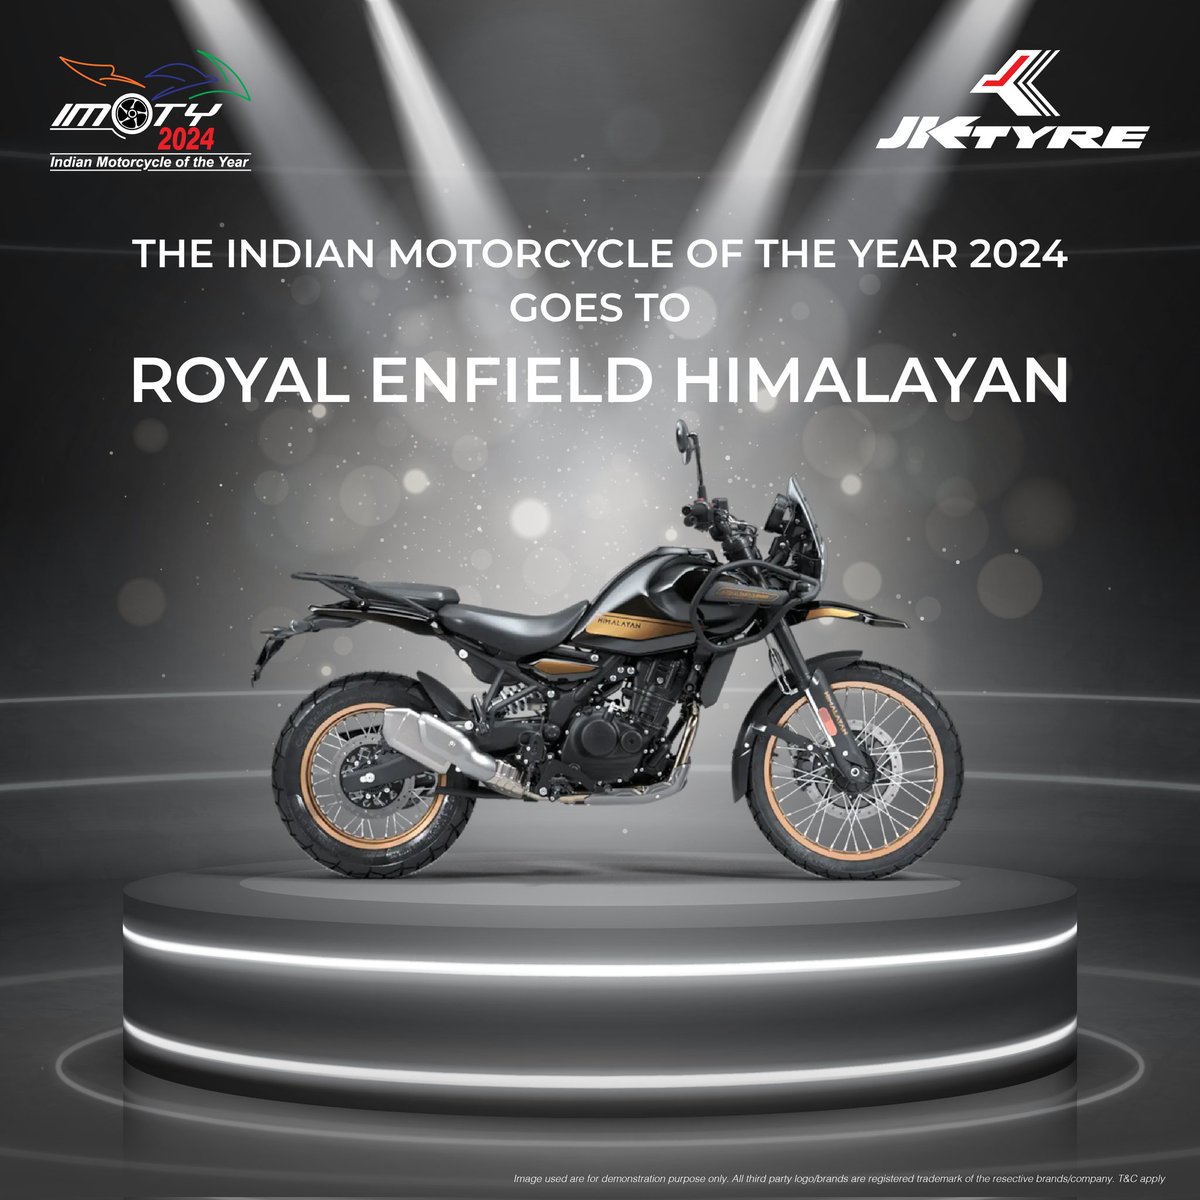 Indian Motorcycle of the Year 2024 goes to ROYAL ENFIELD HIMALAYAN Congratulations @royalenfield @AUTOTODAYMAG @autox @businessline @bikeindia @CARIndia @evoIndia @MyMotoringWorld @odmag #JKTyre #TotalControl #ICOTY #IMOTY